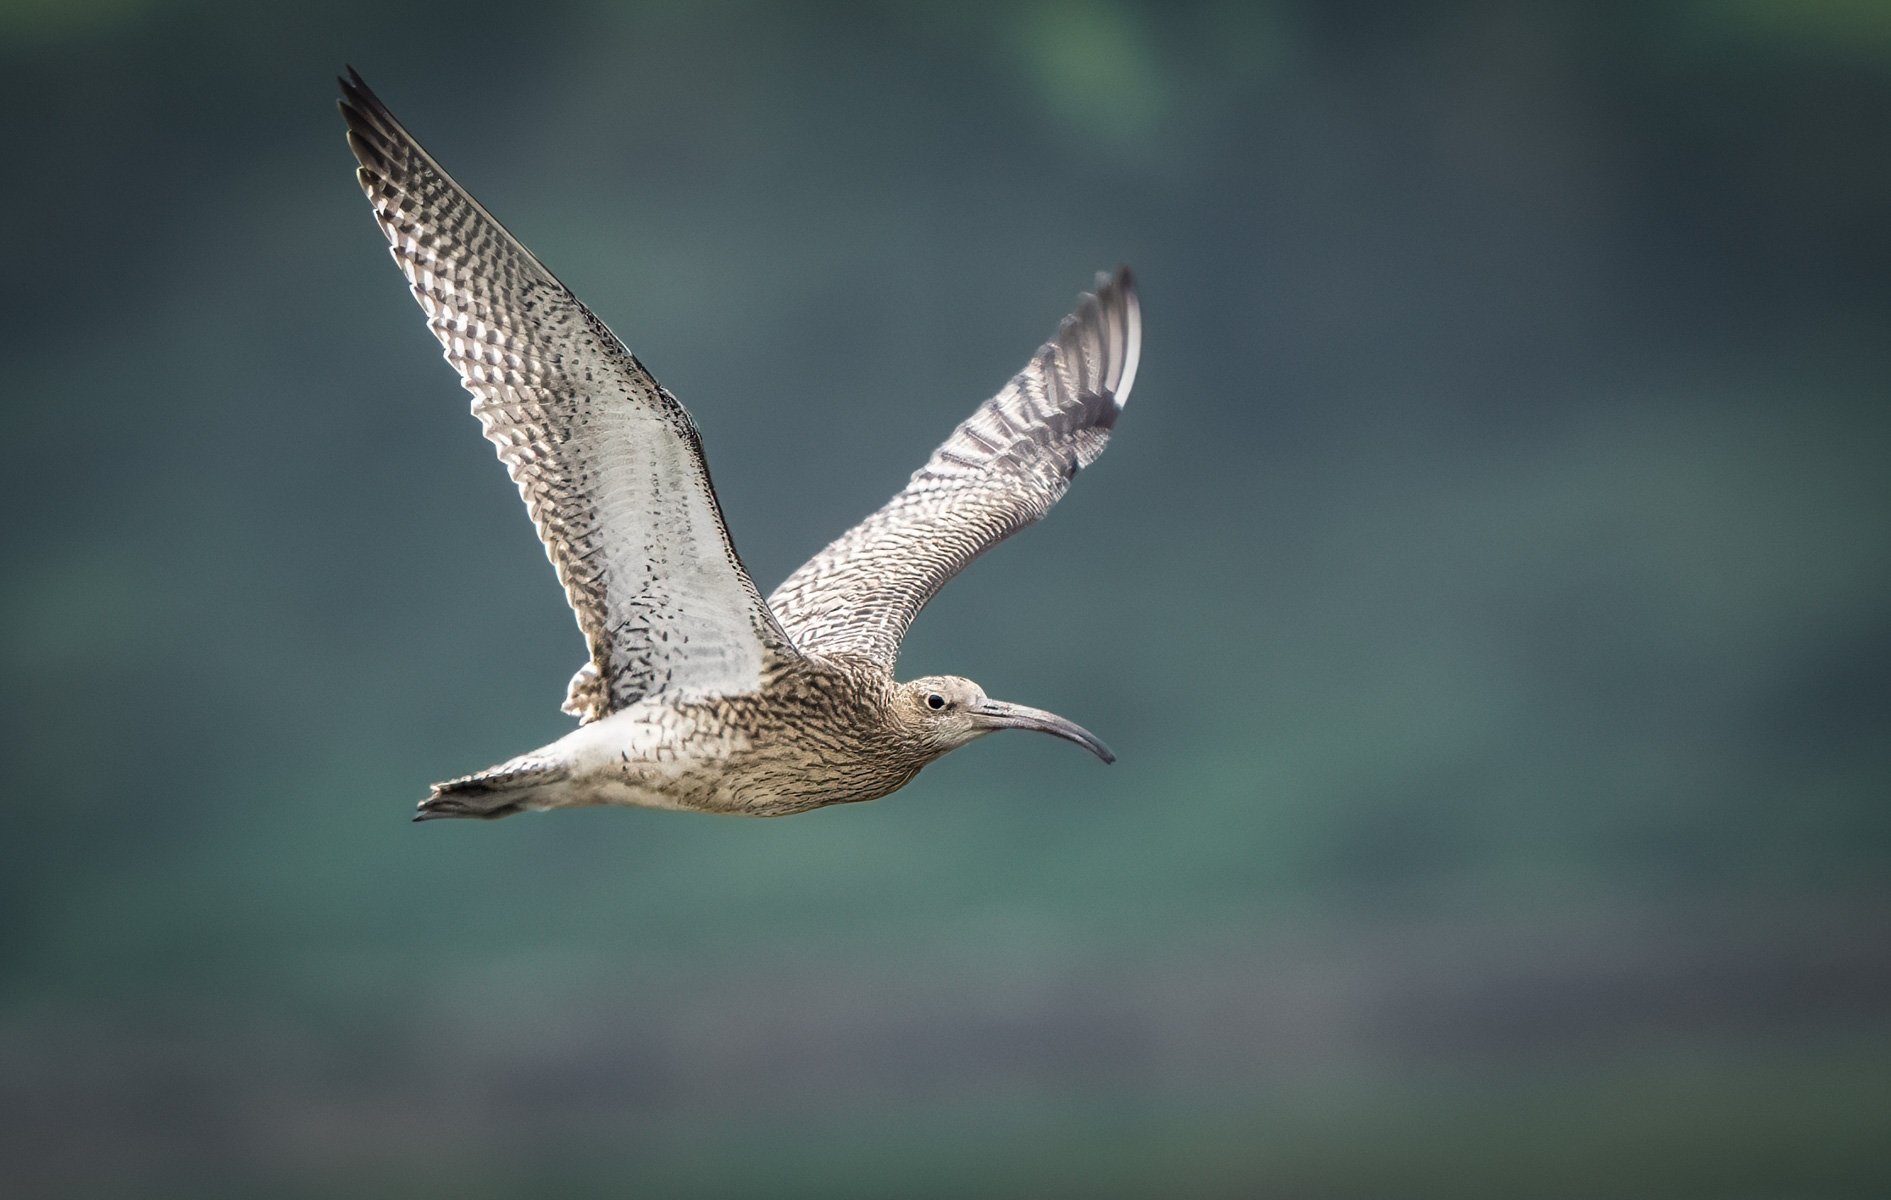 Curlew in Flight by Mark Kemp LRPS